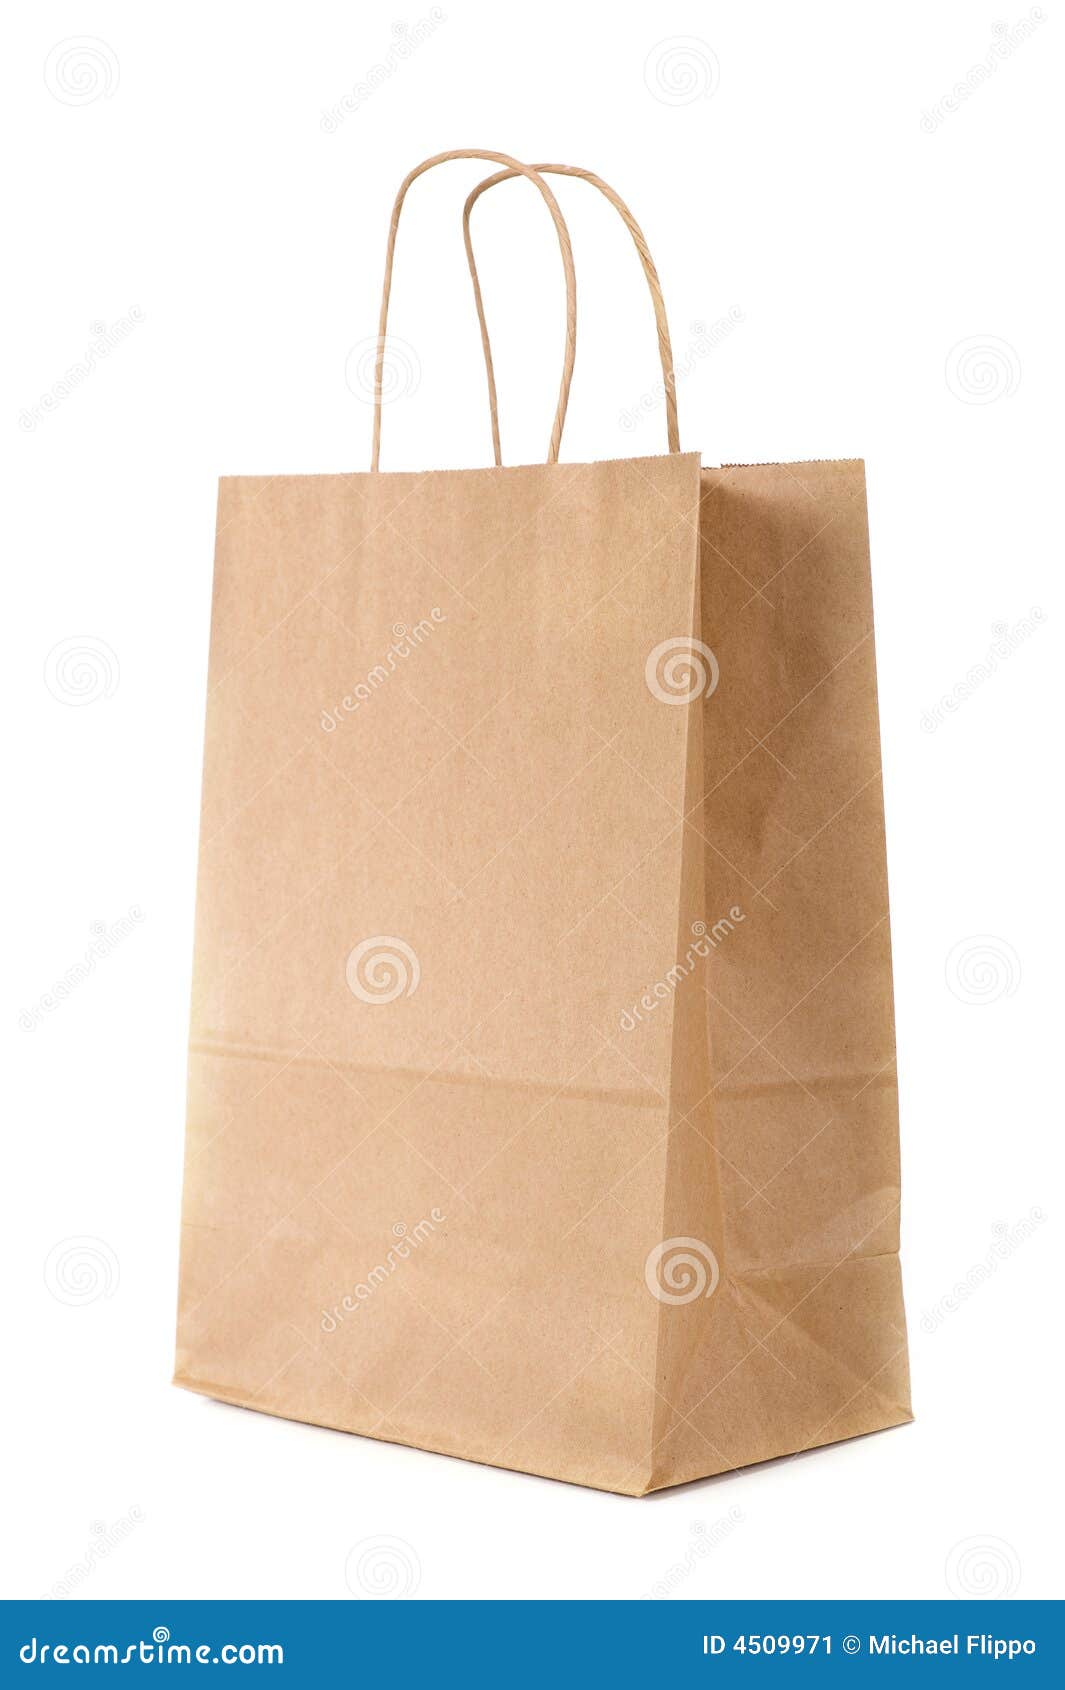 Brown Shopping bag stock image. Image of blank, space - 4509971